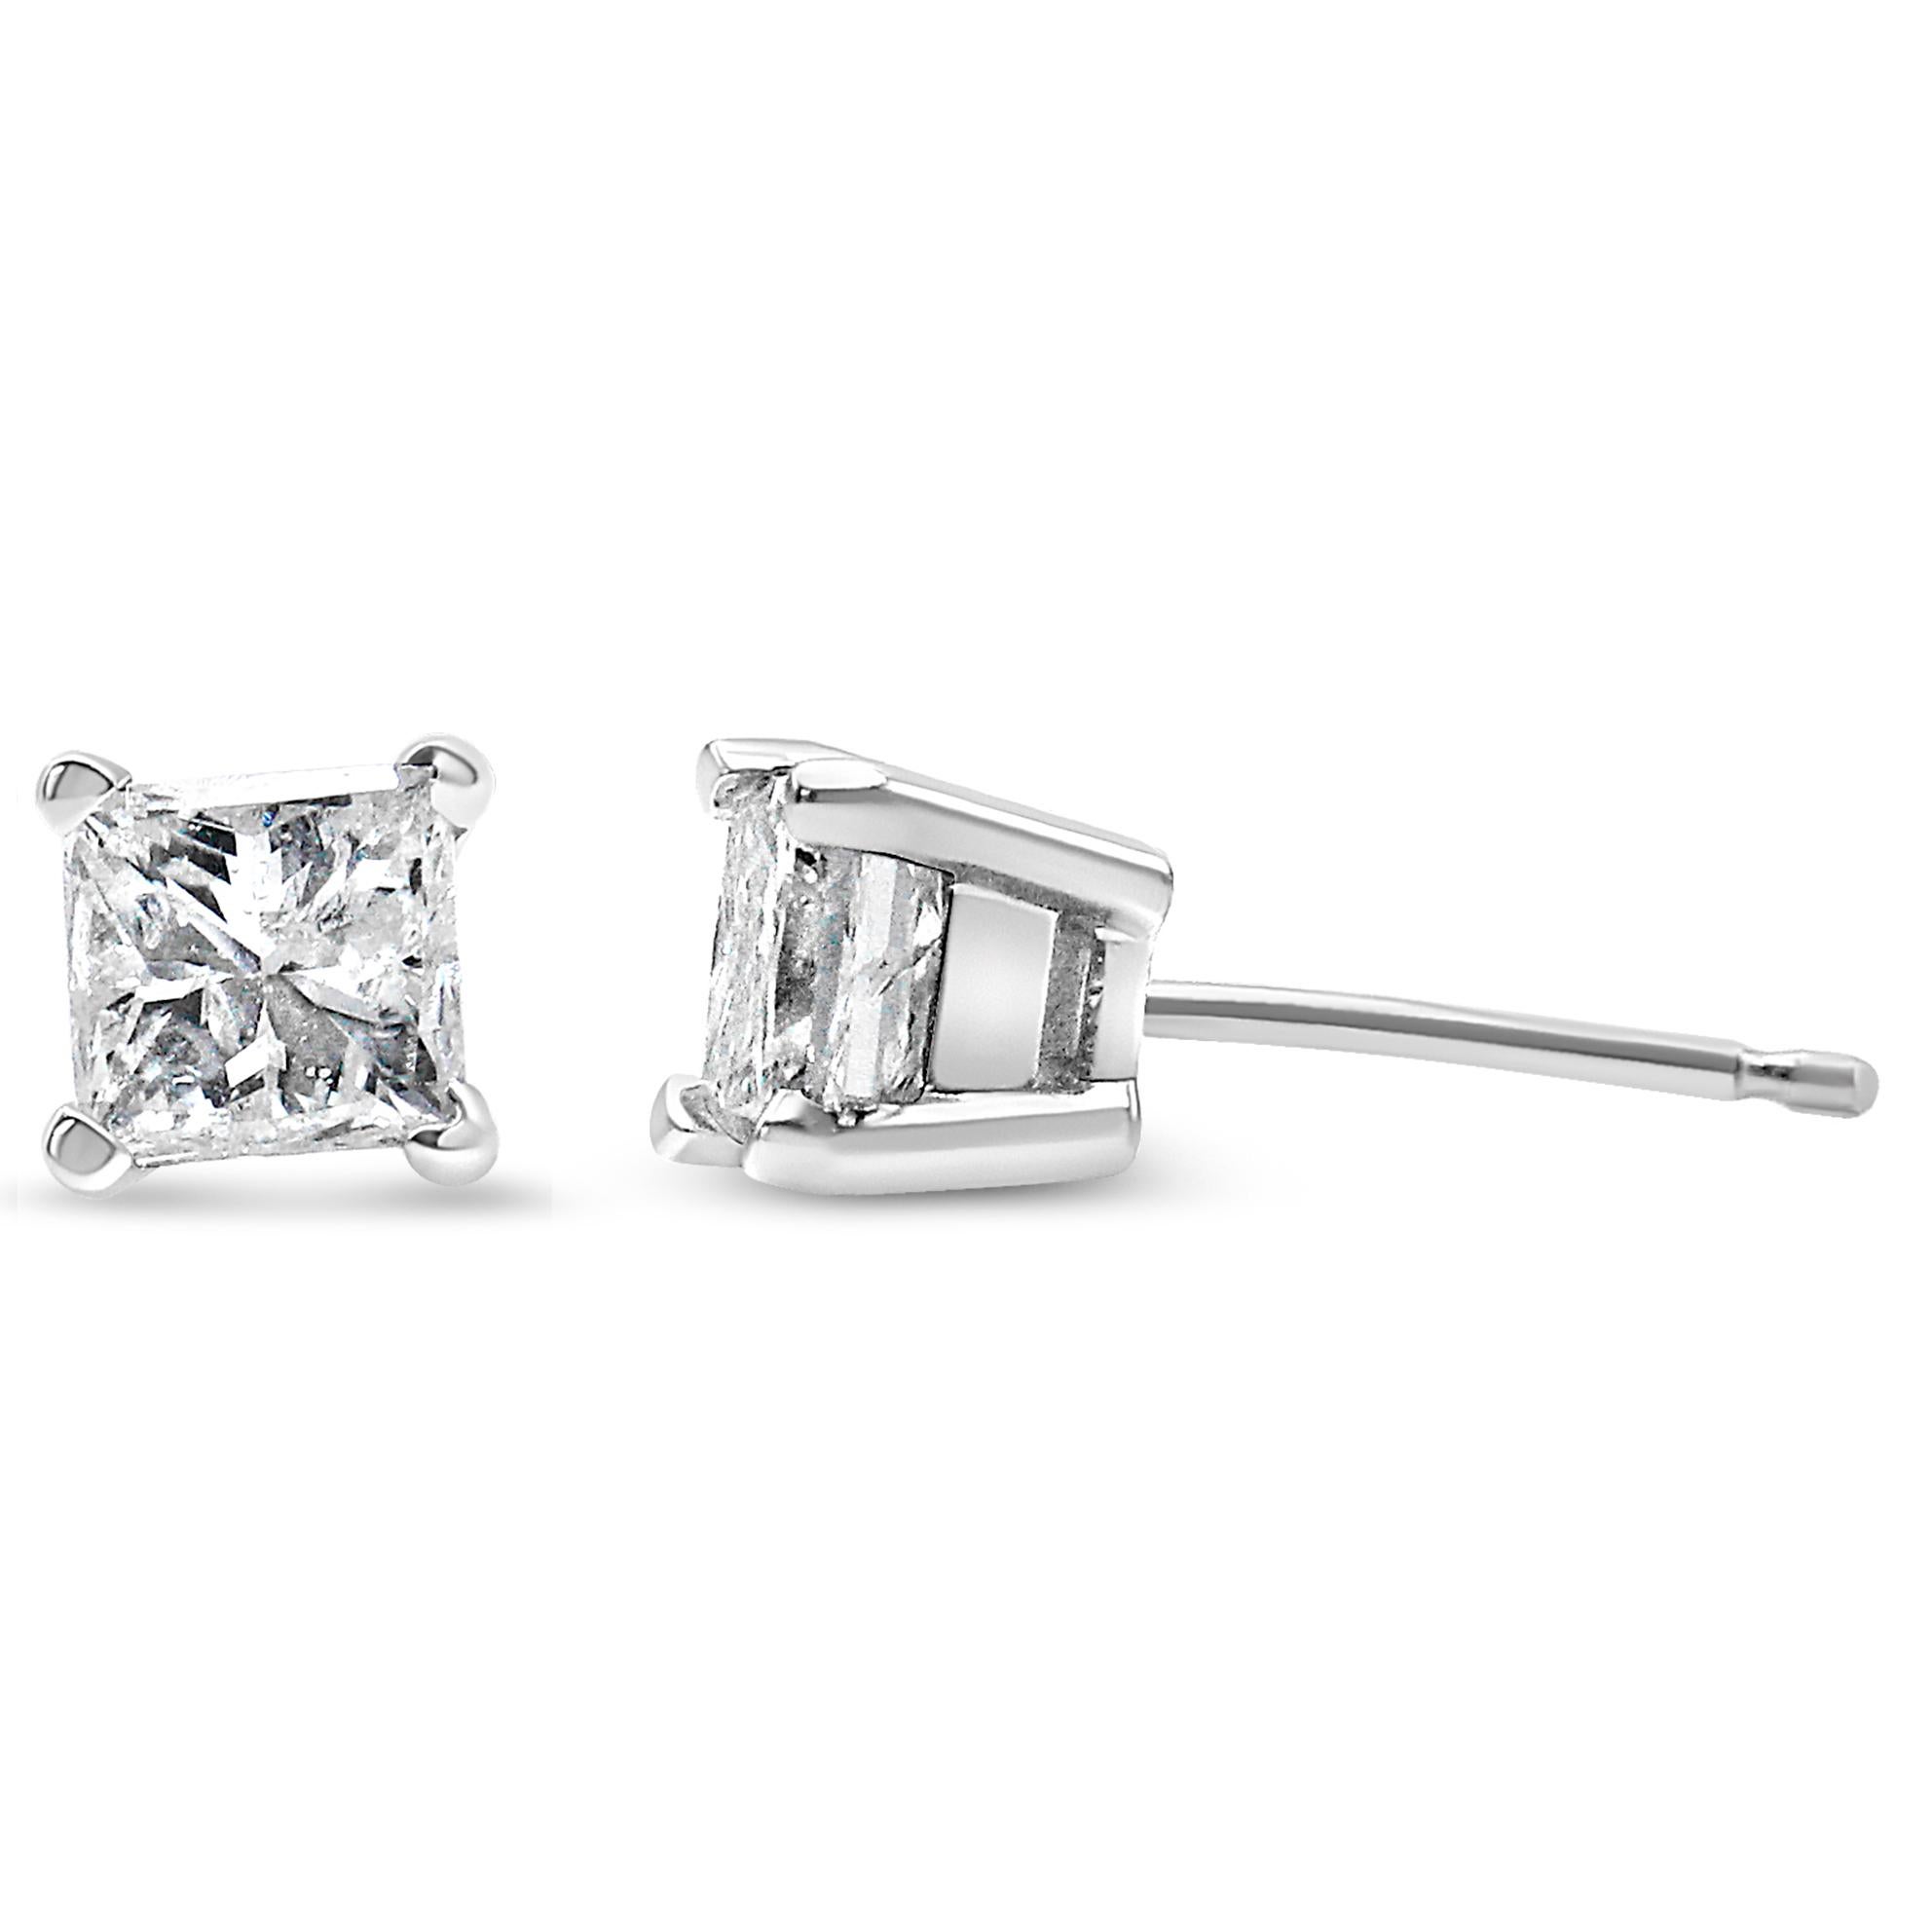 AGS Certified 14K White Gold 1.0 Cttw Princess-Cut Solitaire Diamond Earrings For Sale 1